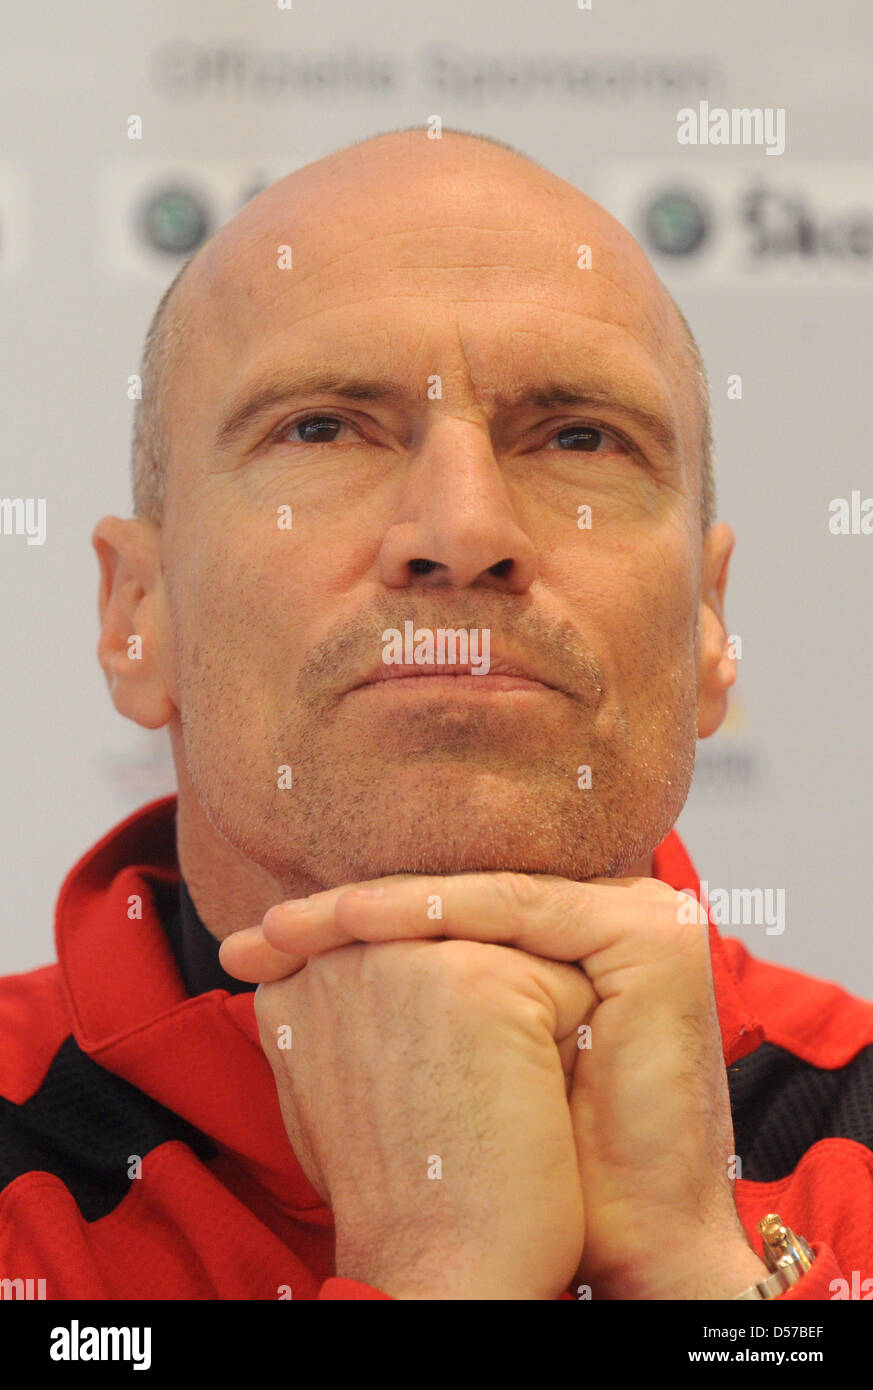 Mark Messier, General Manager of Canada's ice hockey team attends a press conference in Hamburg, Germany, 03 May 2010. Germany and Canada face each other in an ice hockey friendly to take place in Hamburg on 04 May 2010. Photo: MARCUS BRANDT Stock Photo